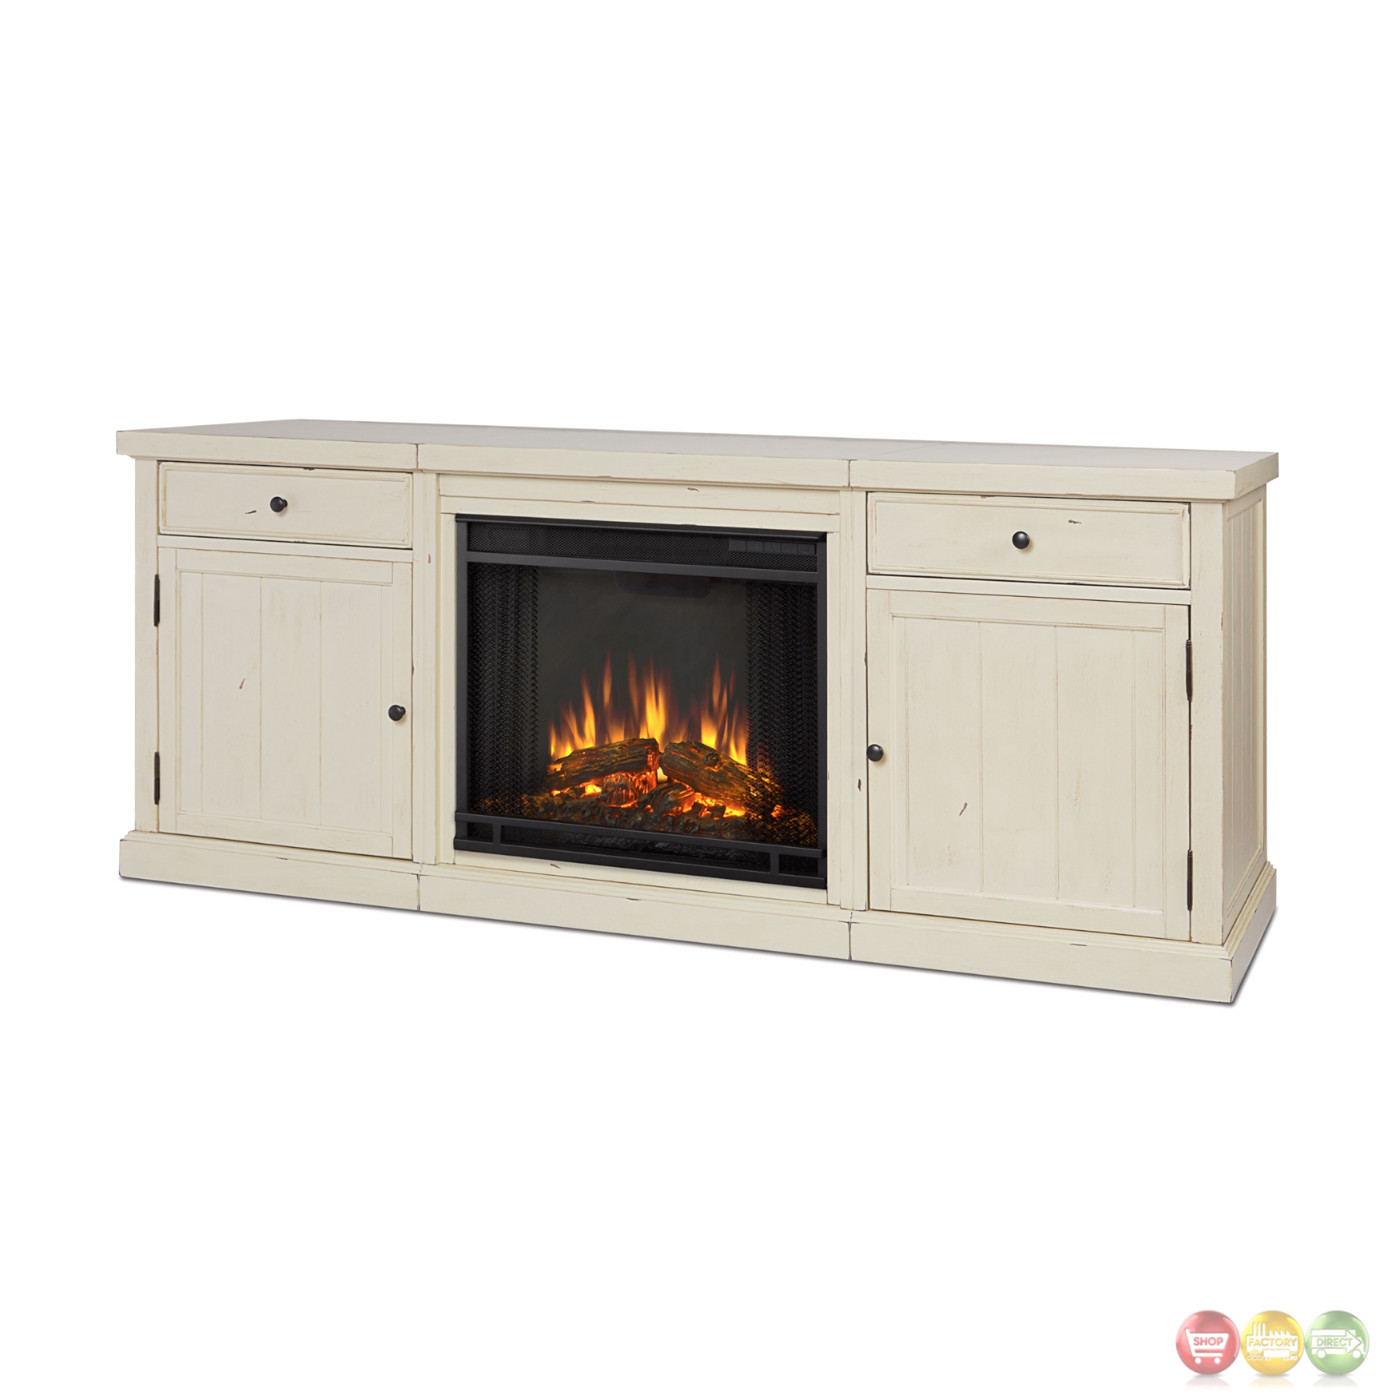 White Electric Fireplace Entertainment Center
 Cassidy Entertainment Center Electric Fireplace In